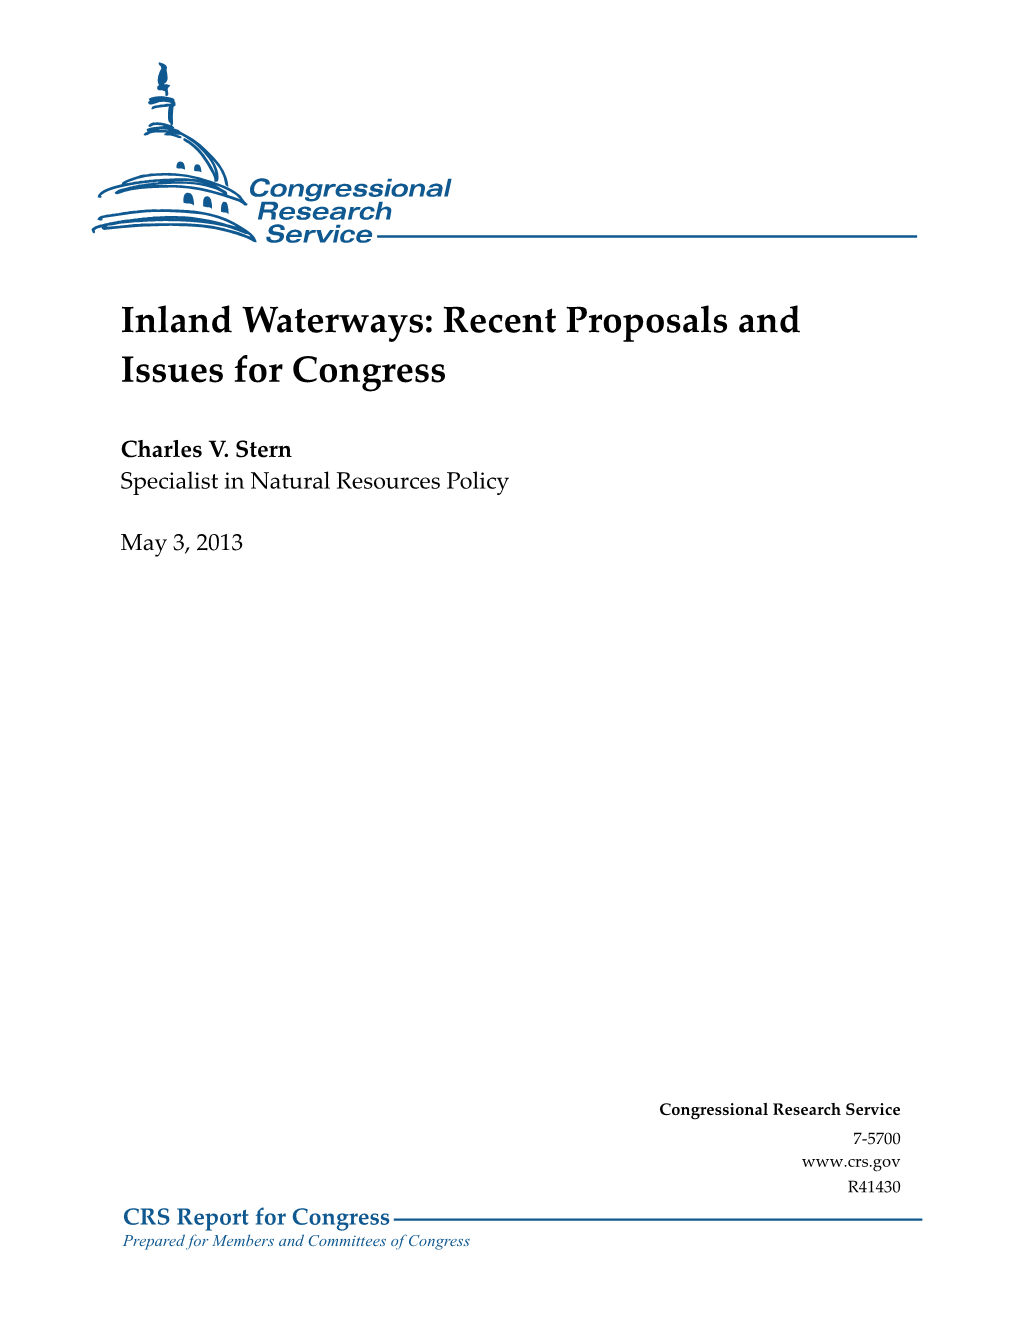 Inland Waterways: Recent Proposals and Issues for Congress